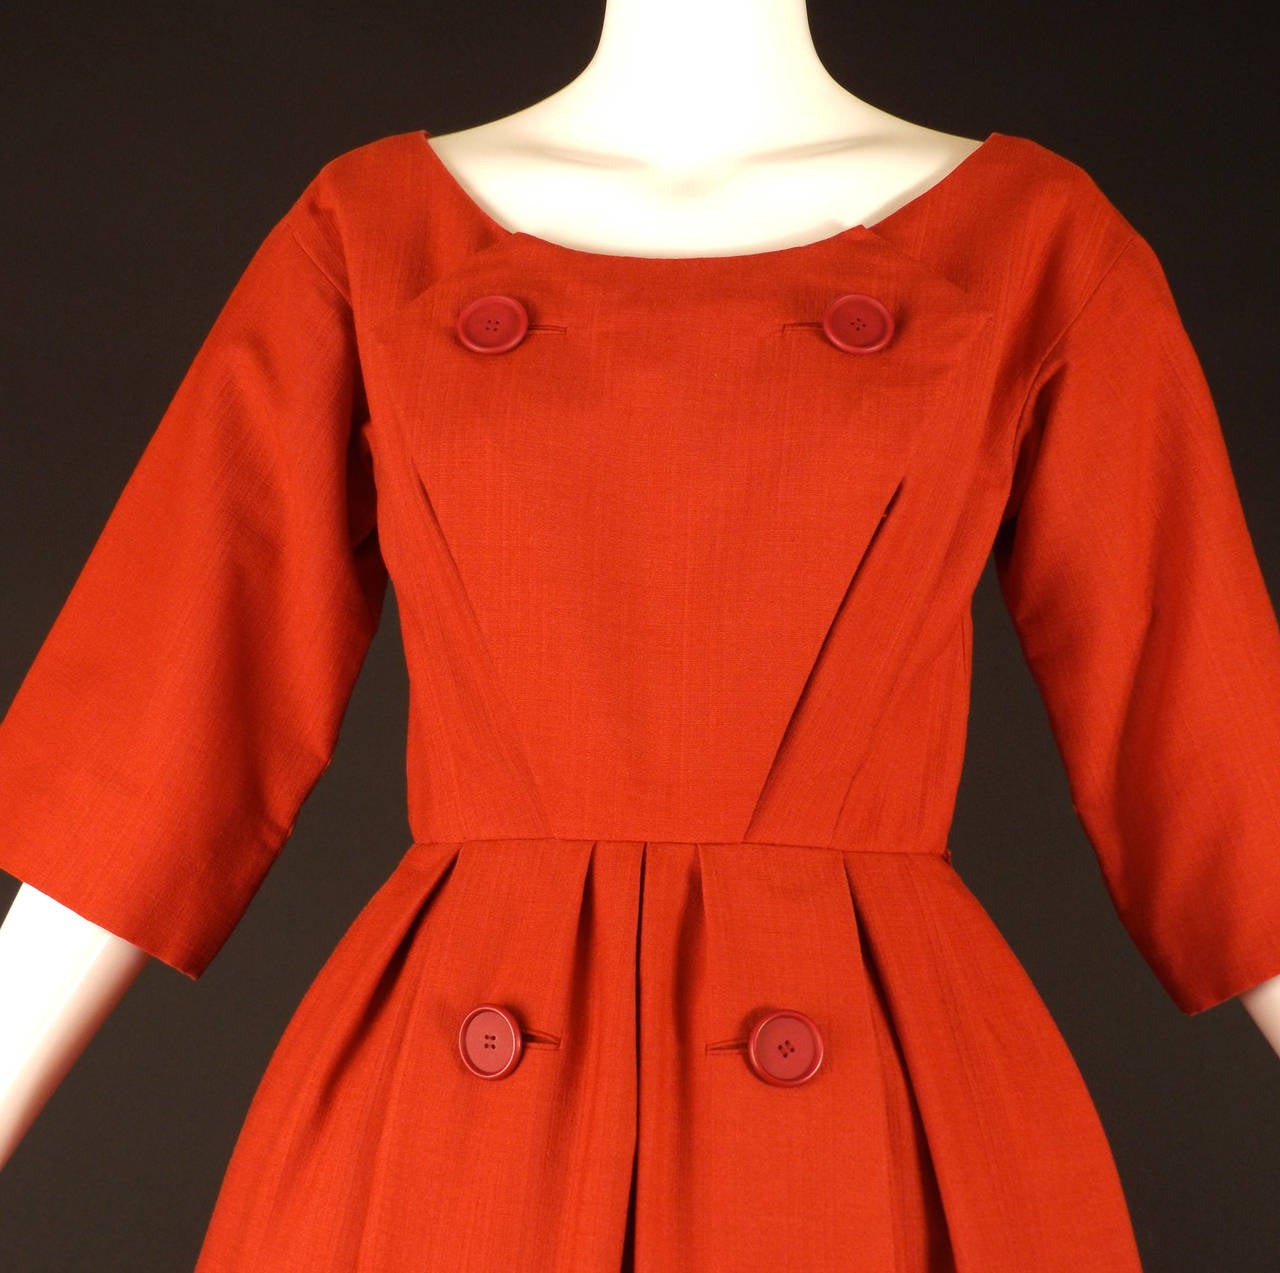 Adorable c.1958 silk and wool blend dress in a brick red. The dress has a scoop neckline with a bib front panel down the front with two large red button decoration on the chest. Single released pleats point upward from the waistline to the bust for